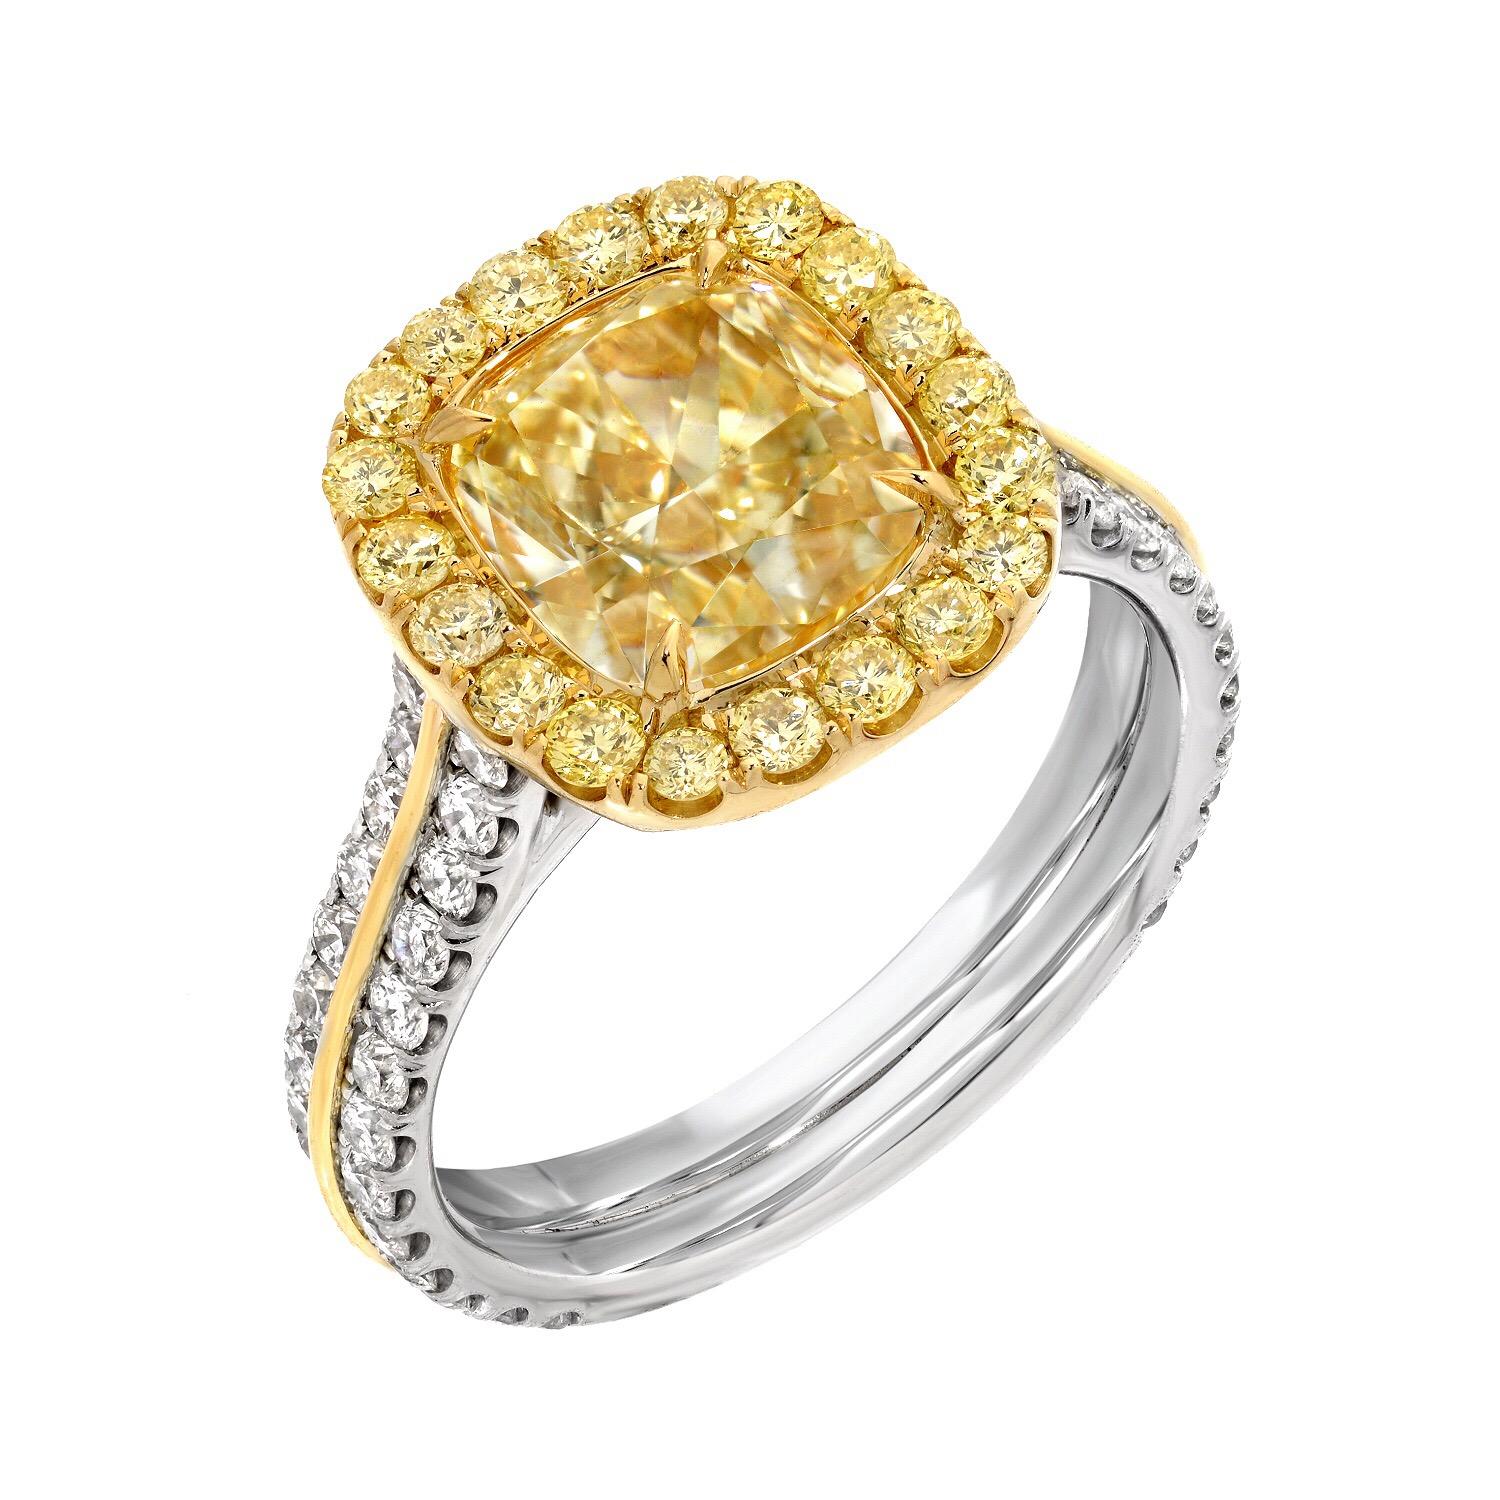 Platinum and 18K yellow gold ring, set with a supreme, G.I.A certified, 2.40 carat Fancy Light Yellow diamond cushion cut, VS2 clarity, surrounded by fancy yellow diamond rounds totaling 0.37 carats, and accented by round white diamonds totaling